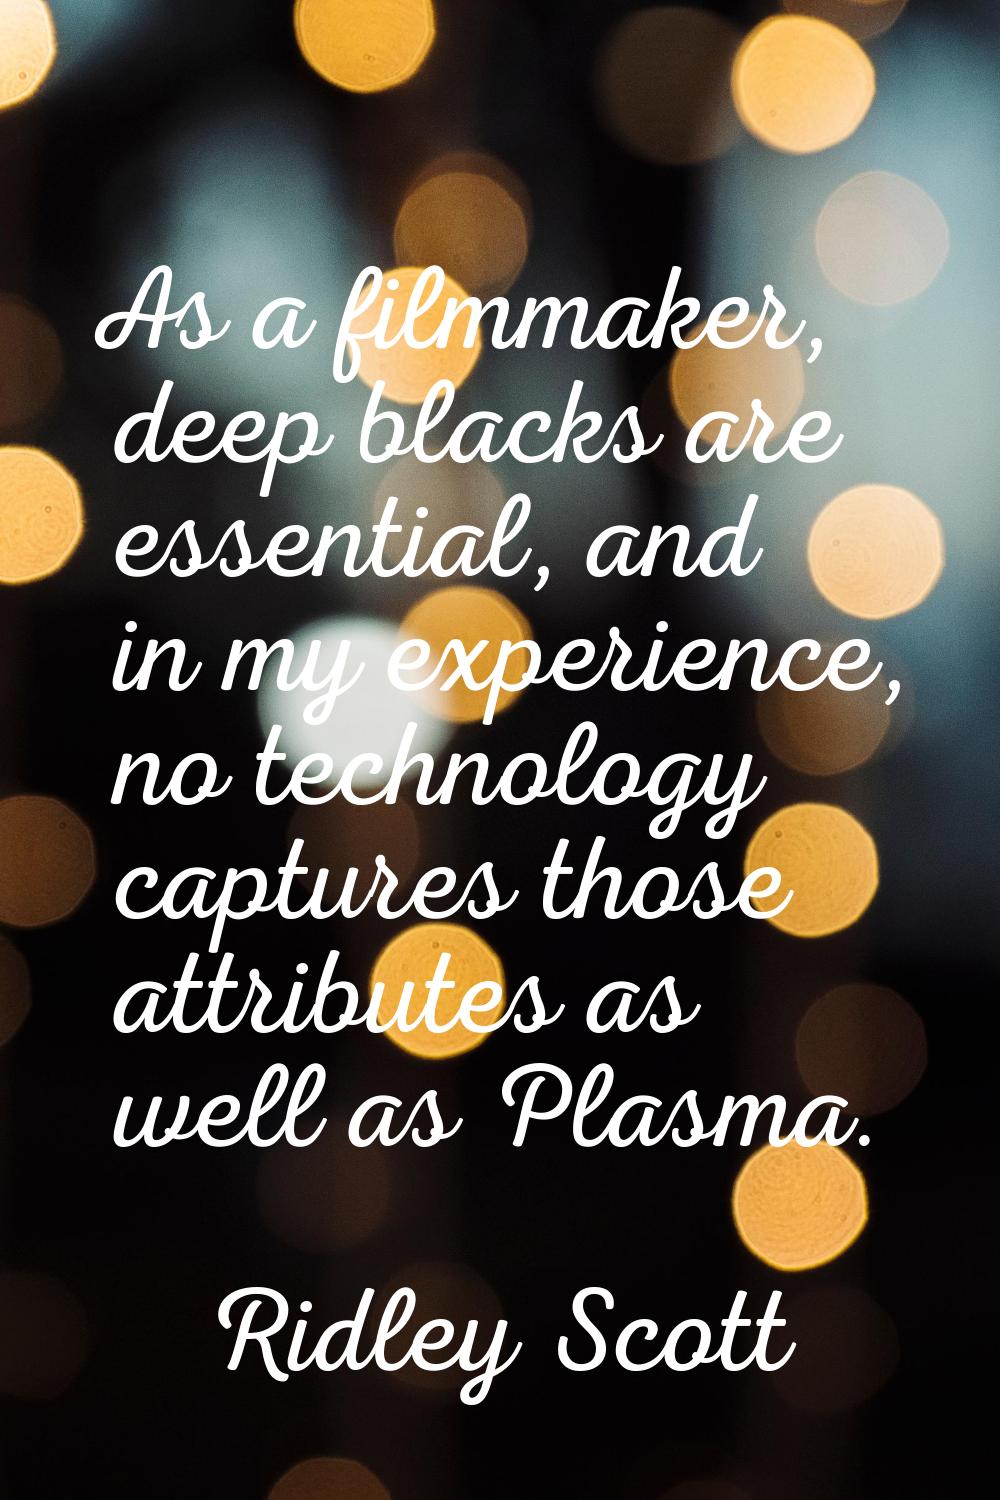 As a filmmaker, deep blacks are essential, and in my experience, no technology captures those attri